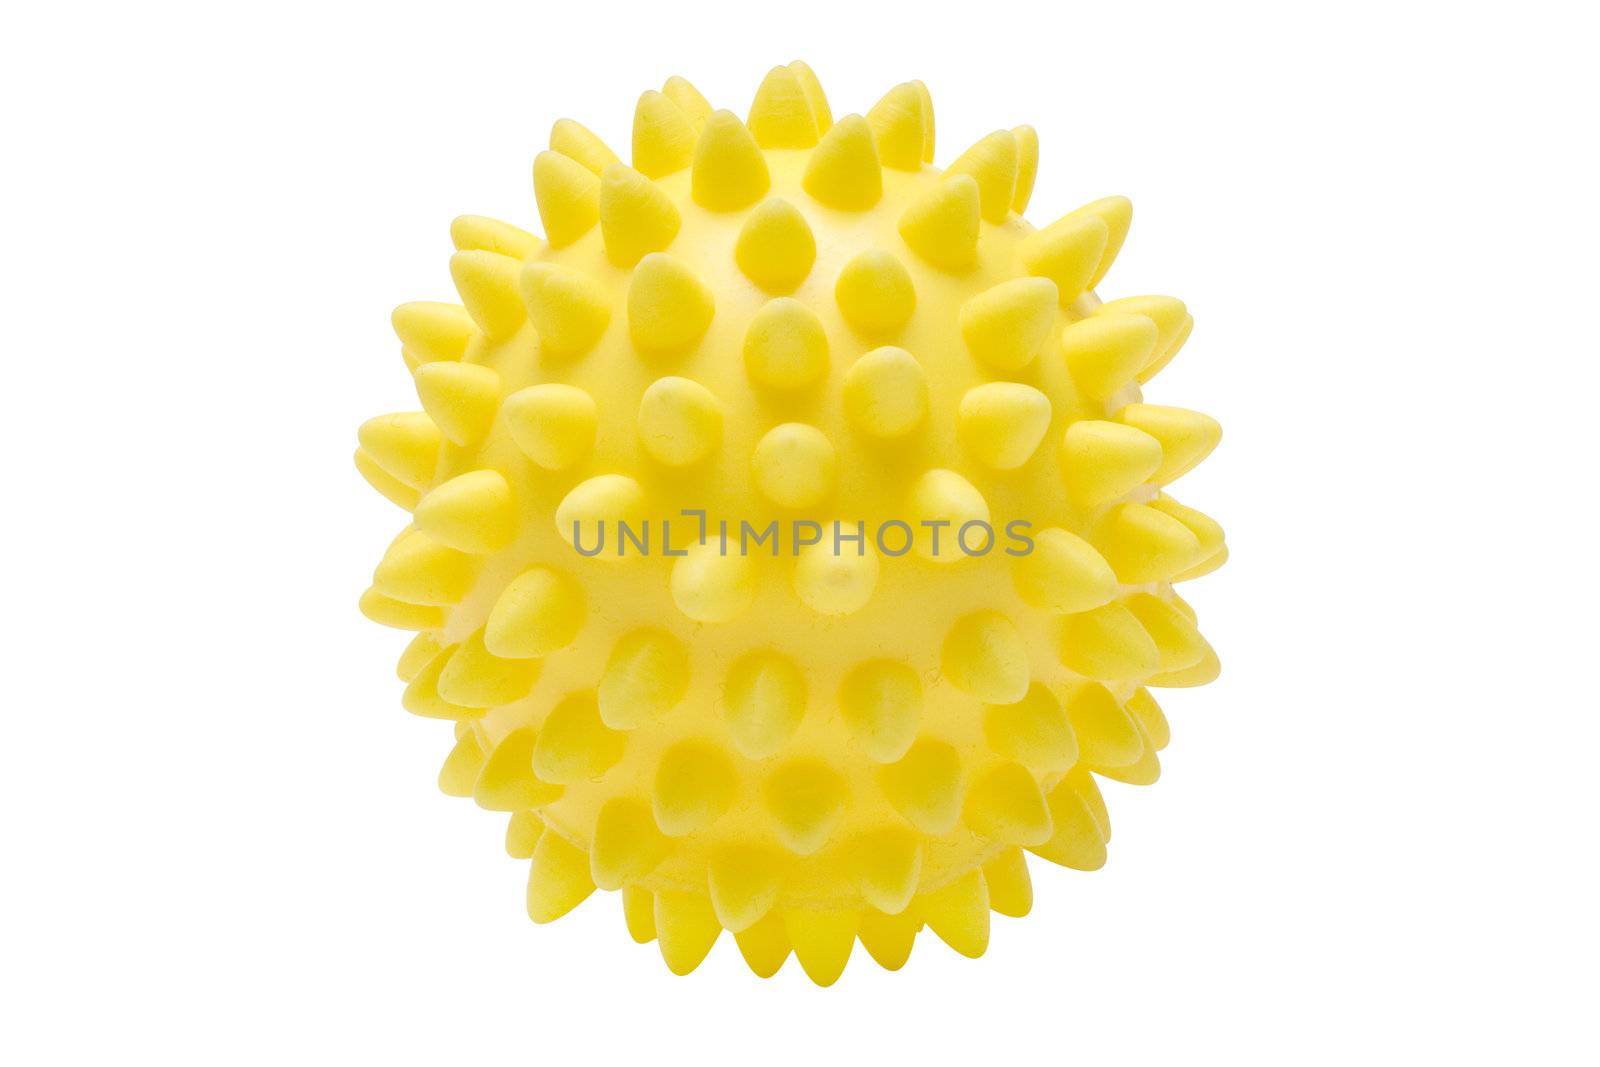 Massage Ball with Clipping Path by winterling